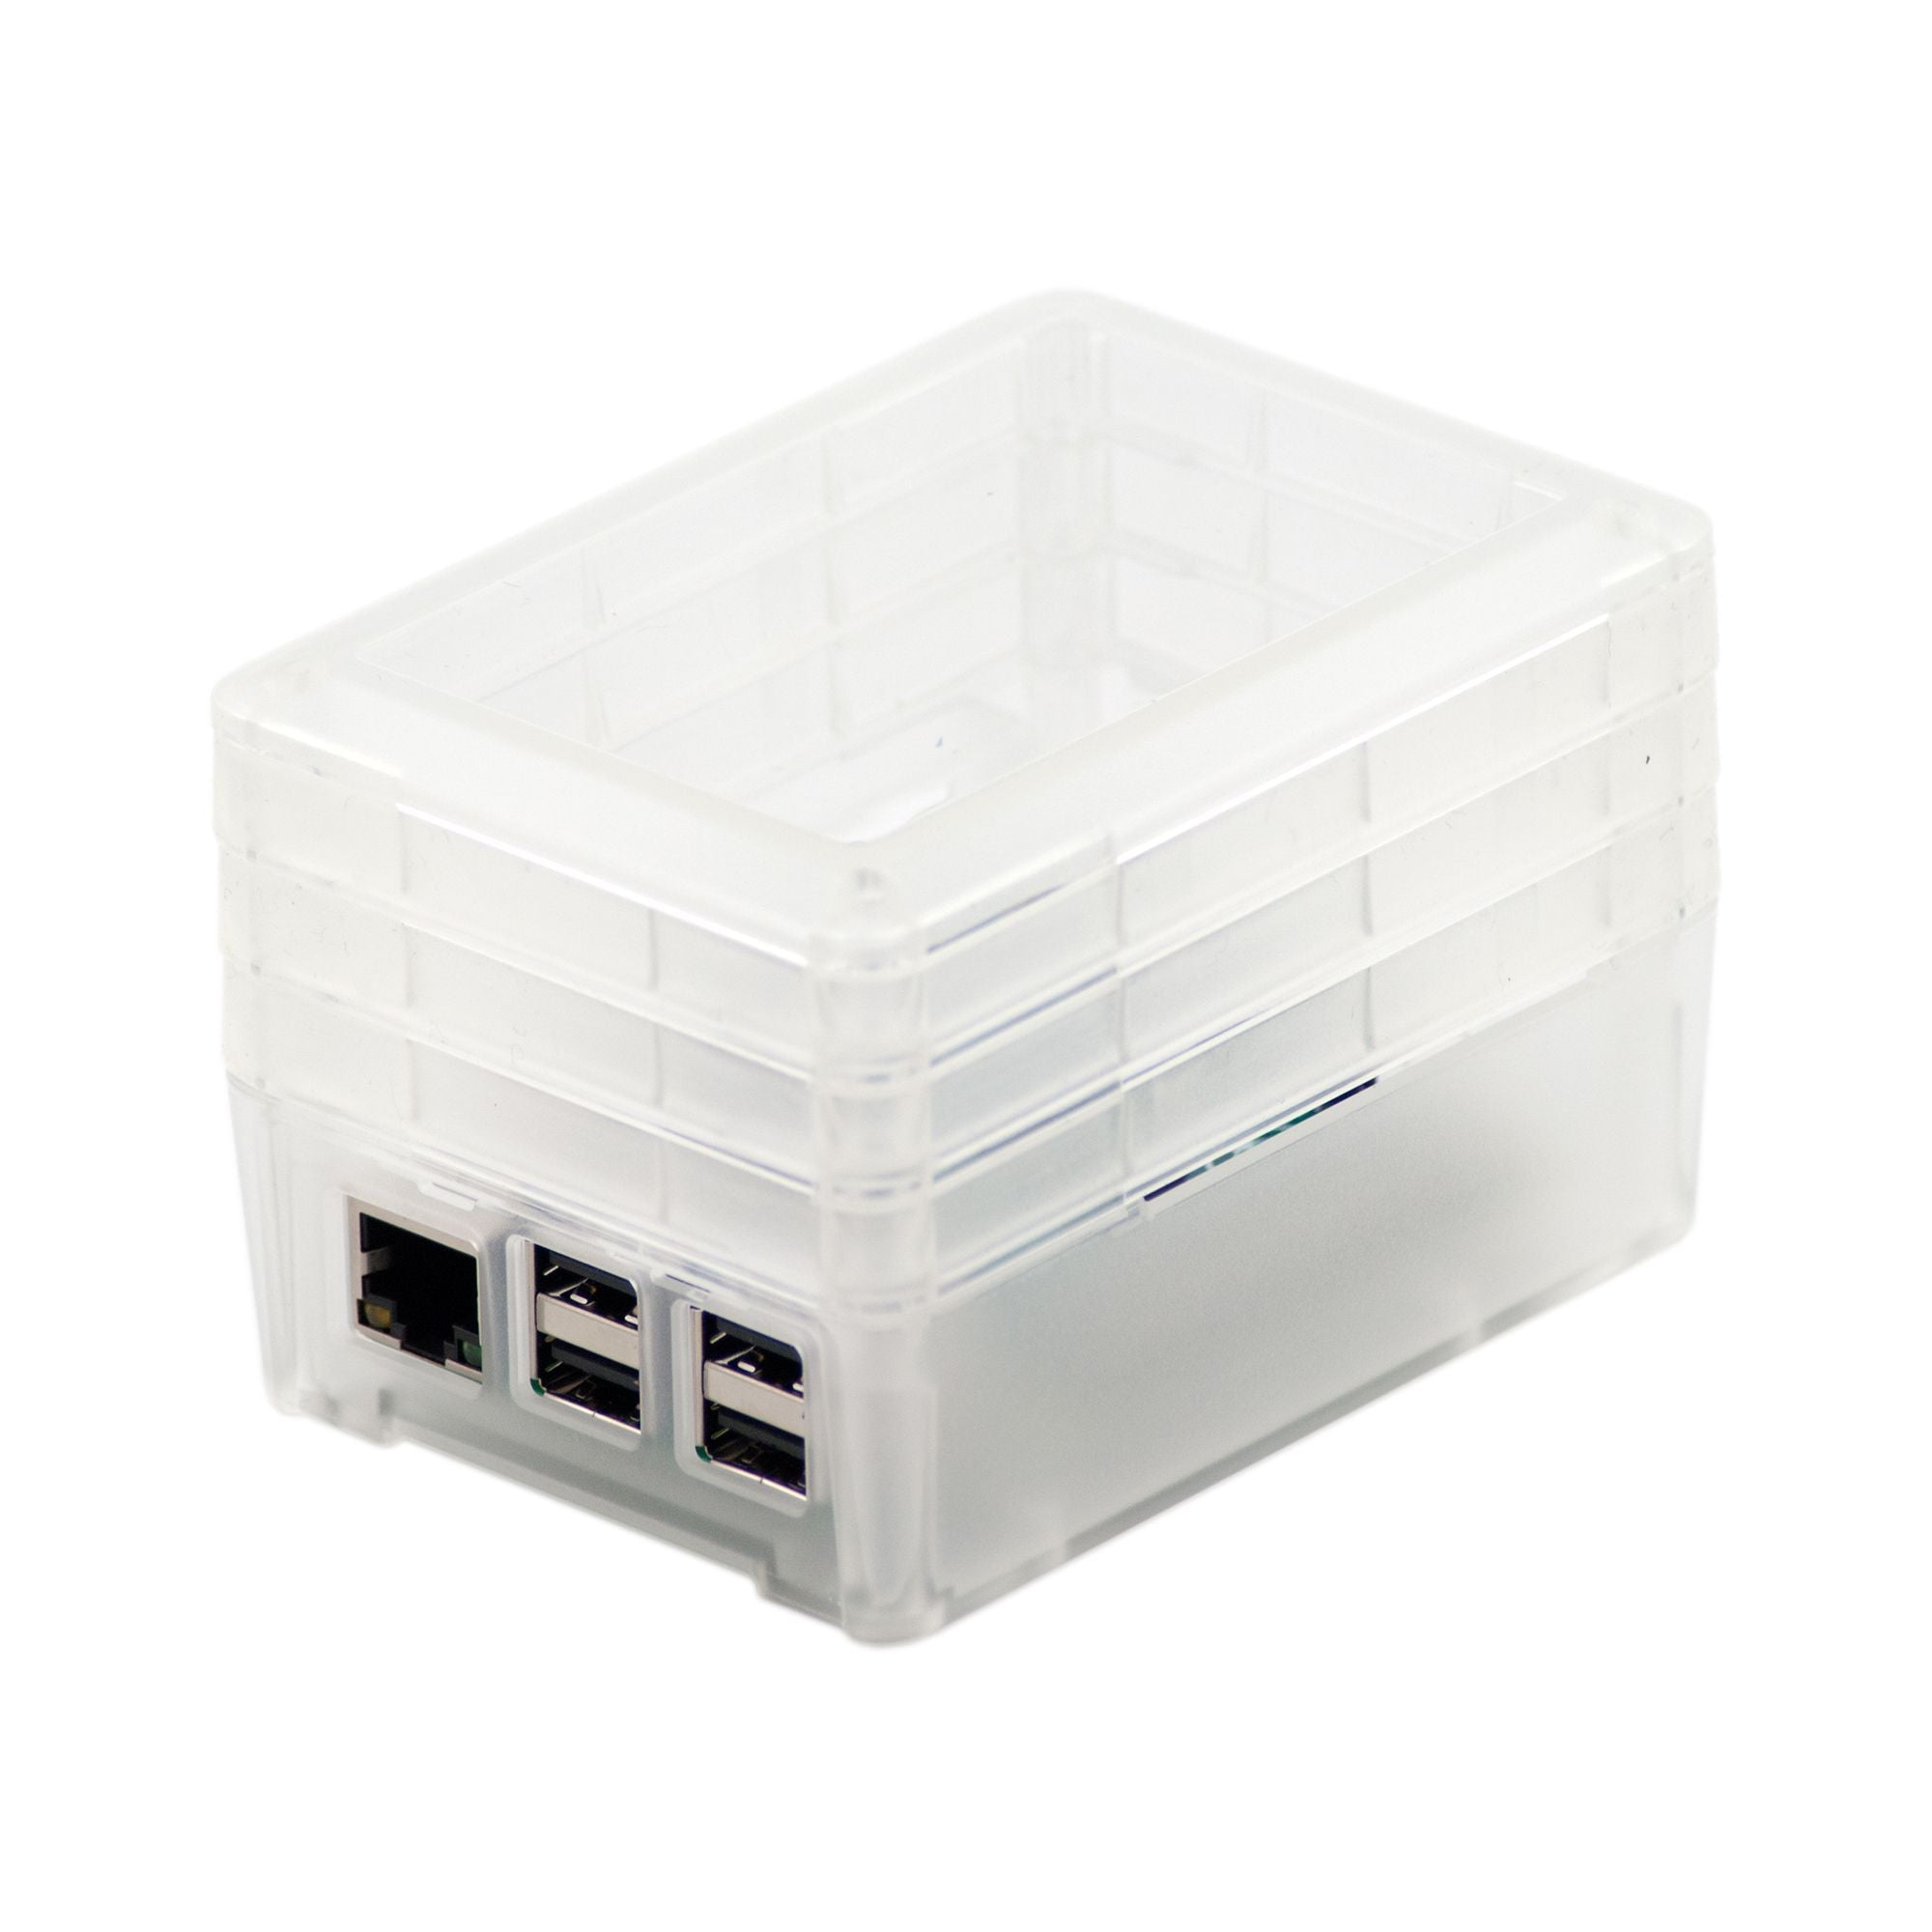 10mm Spacer for Modular Raspberry Pi Case - Clear - The Pi Hut